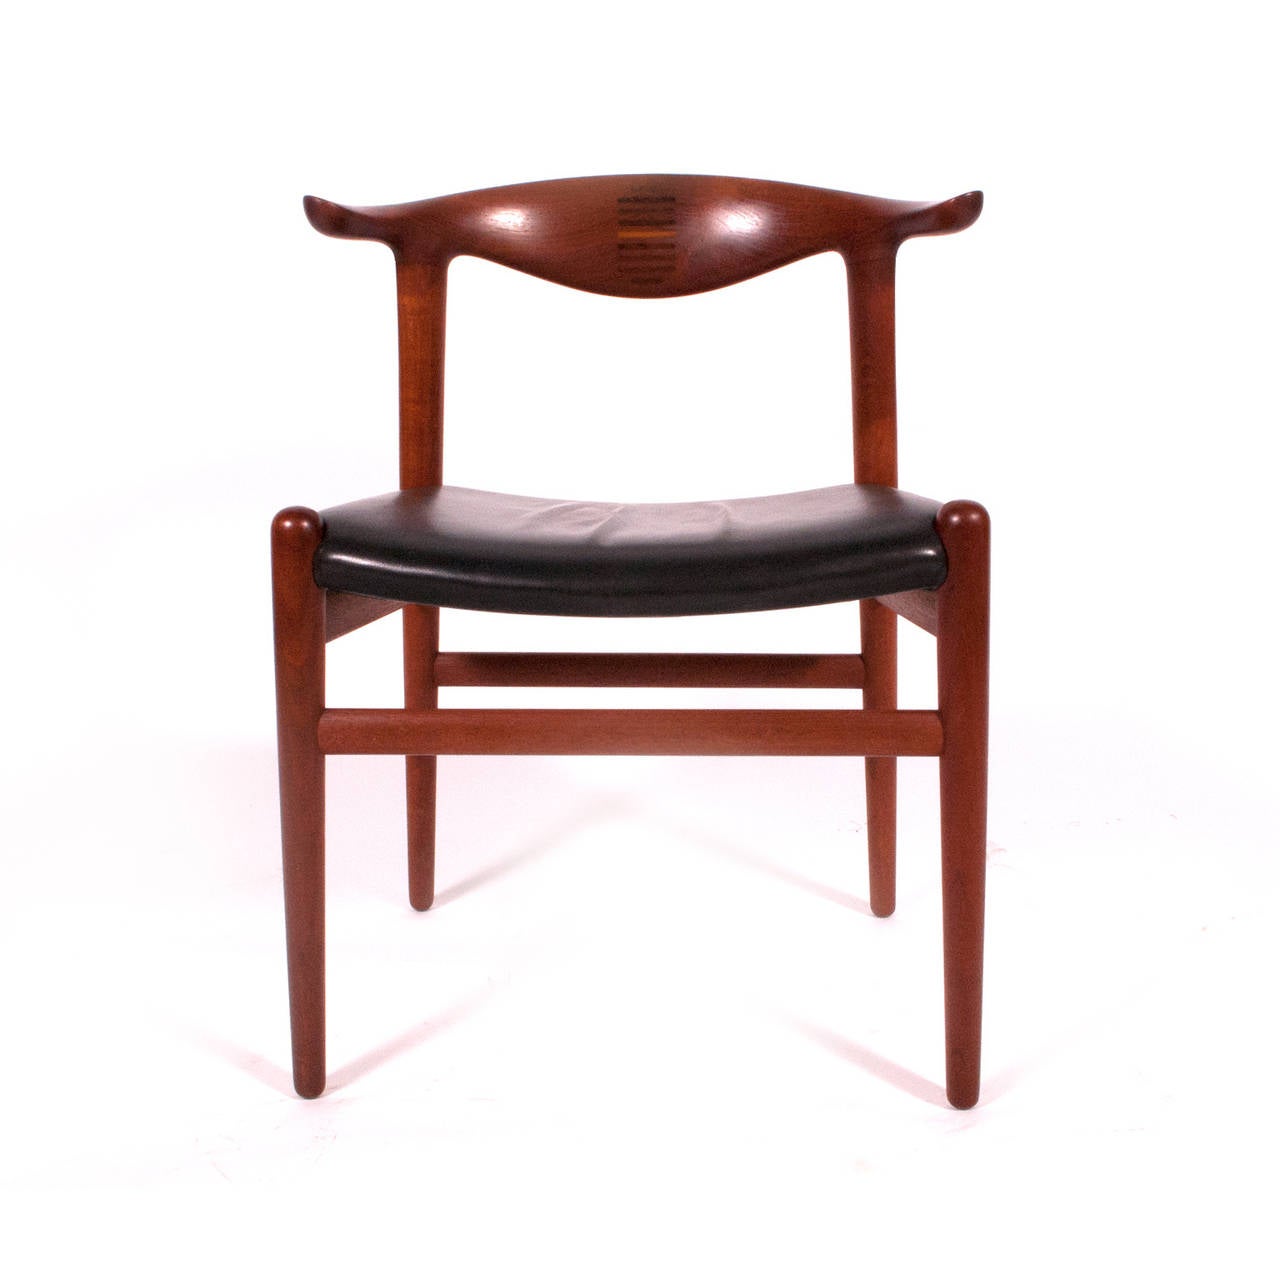 Original production Johannes Hansen solid teak with rosewood inlay back cowhorn chair, original leather seat, retains libels from cabinet maker and Knoll paper sticker, all original condition.